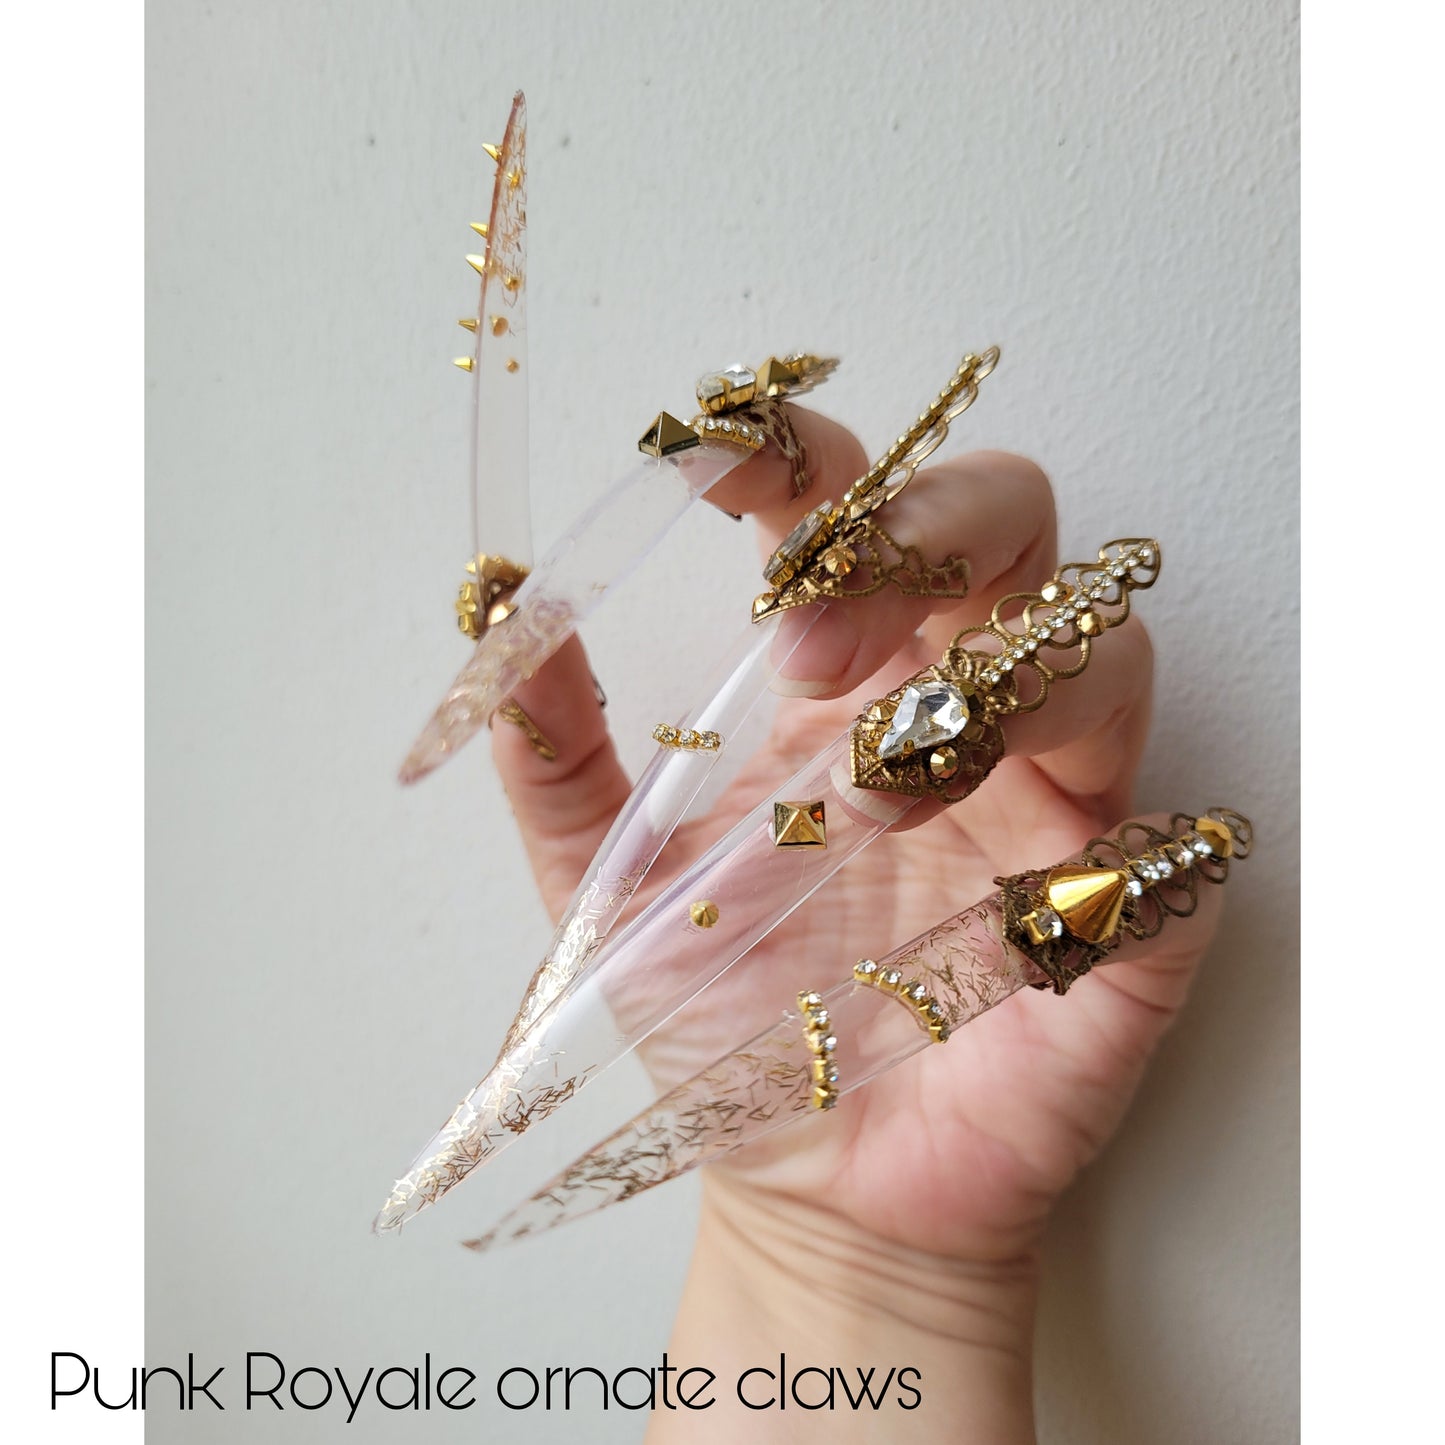 Made-to-order: the Punk Royale ornate claws